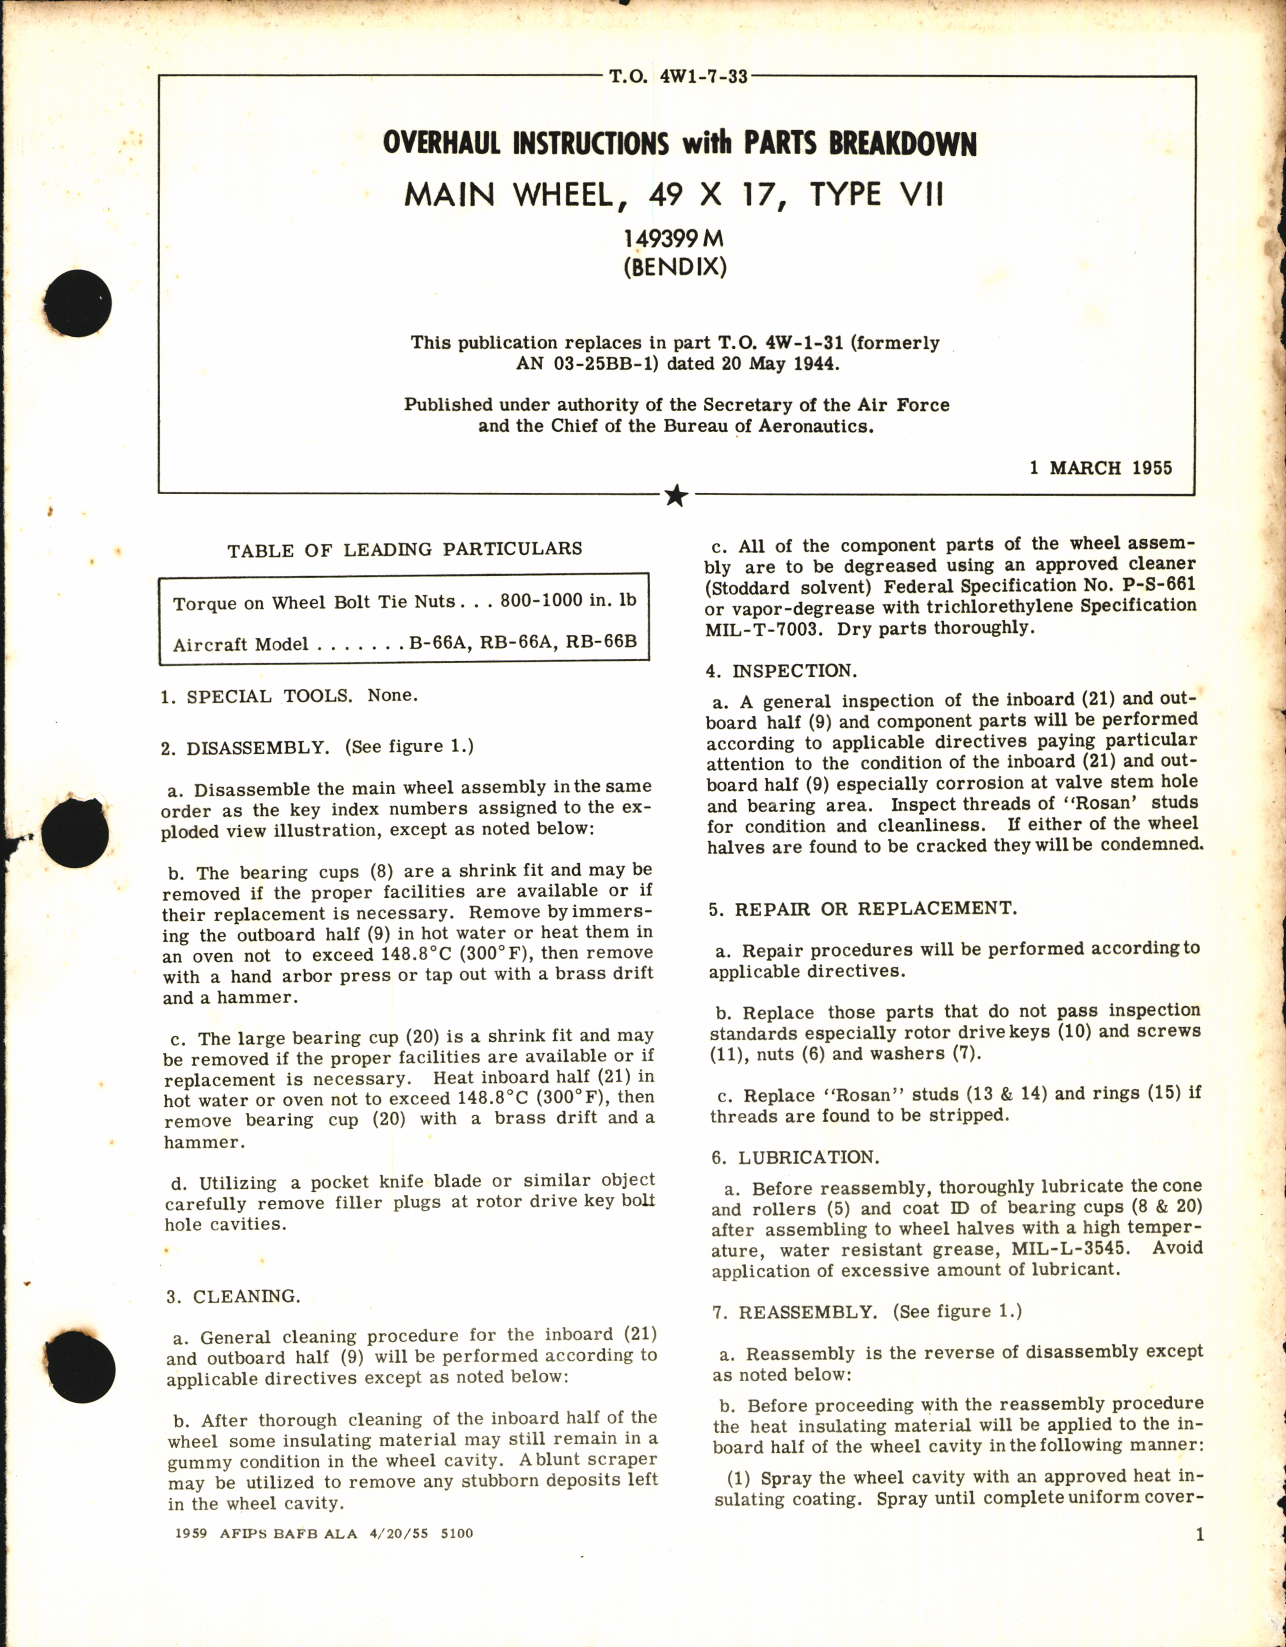 Sample page 1 from AirCorps Library document: Overhaul Instructions with Parts Breakdown for Main Wheel 49 x 17, Type VII